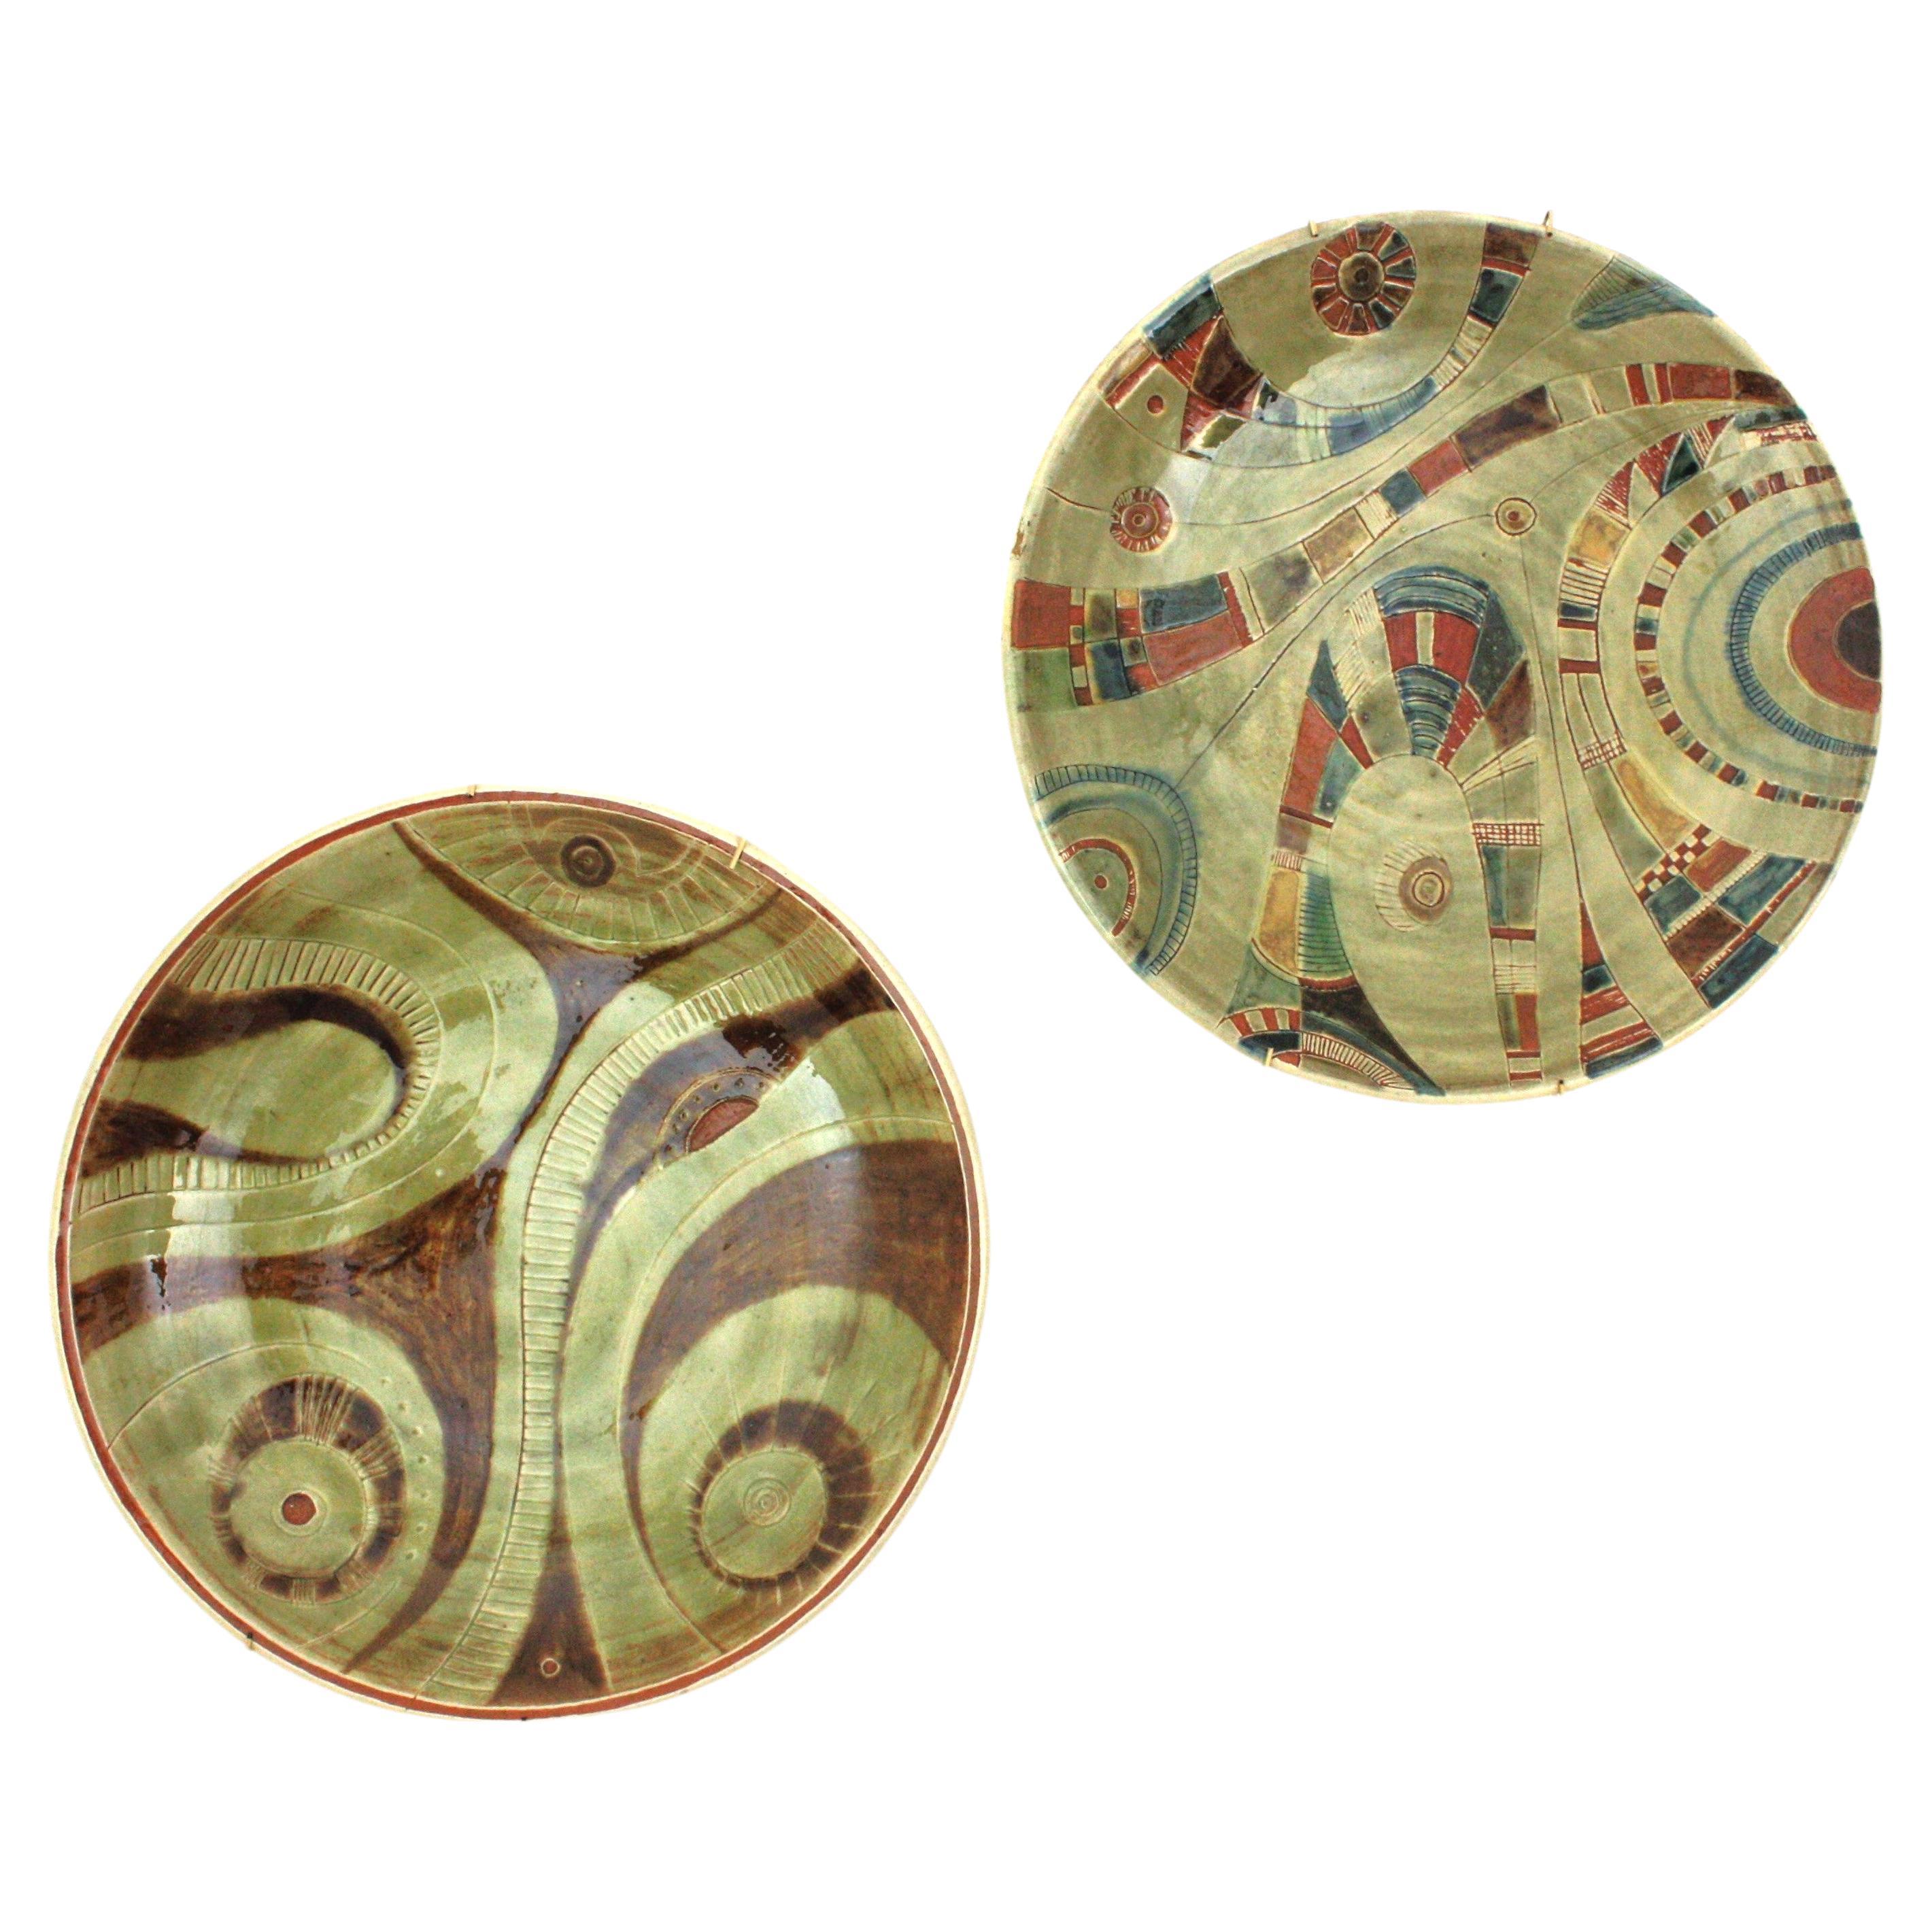 Unmatching pair of glazed ceramic wall plates from Catalonia, Spain, 1960s.
Each one has a different abstract design with multi color geometric motifs.
Large size.
Excellent condition.
Signed 